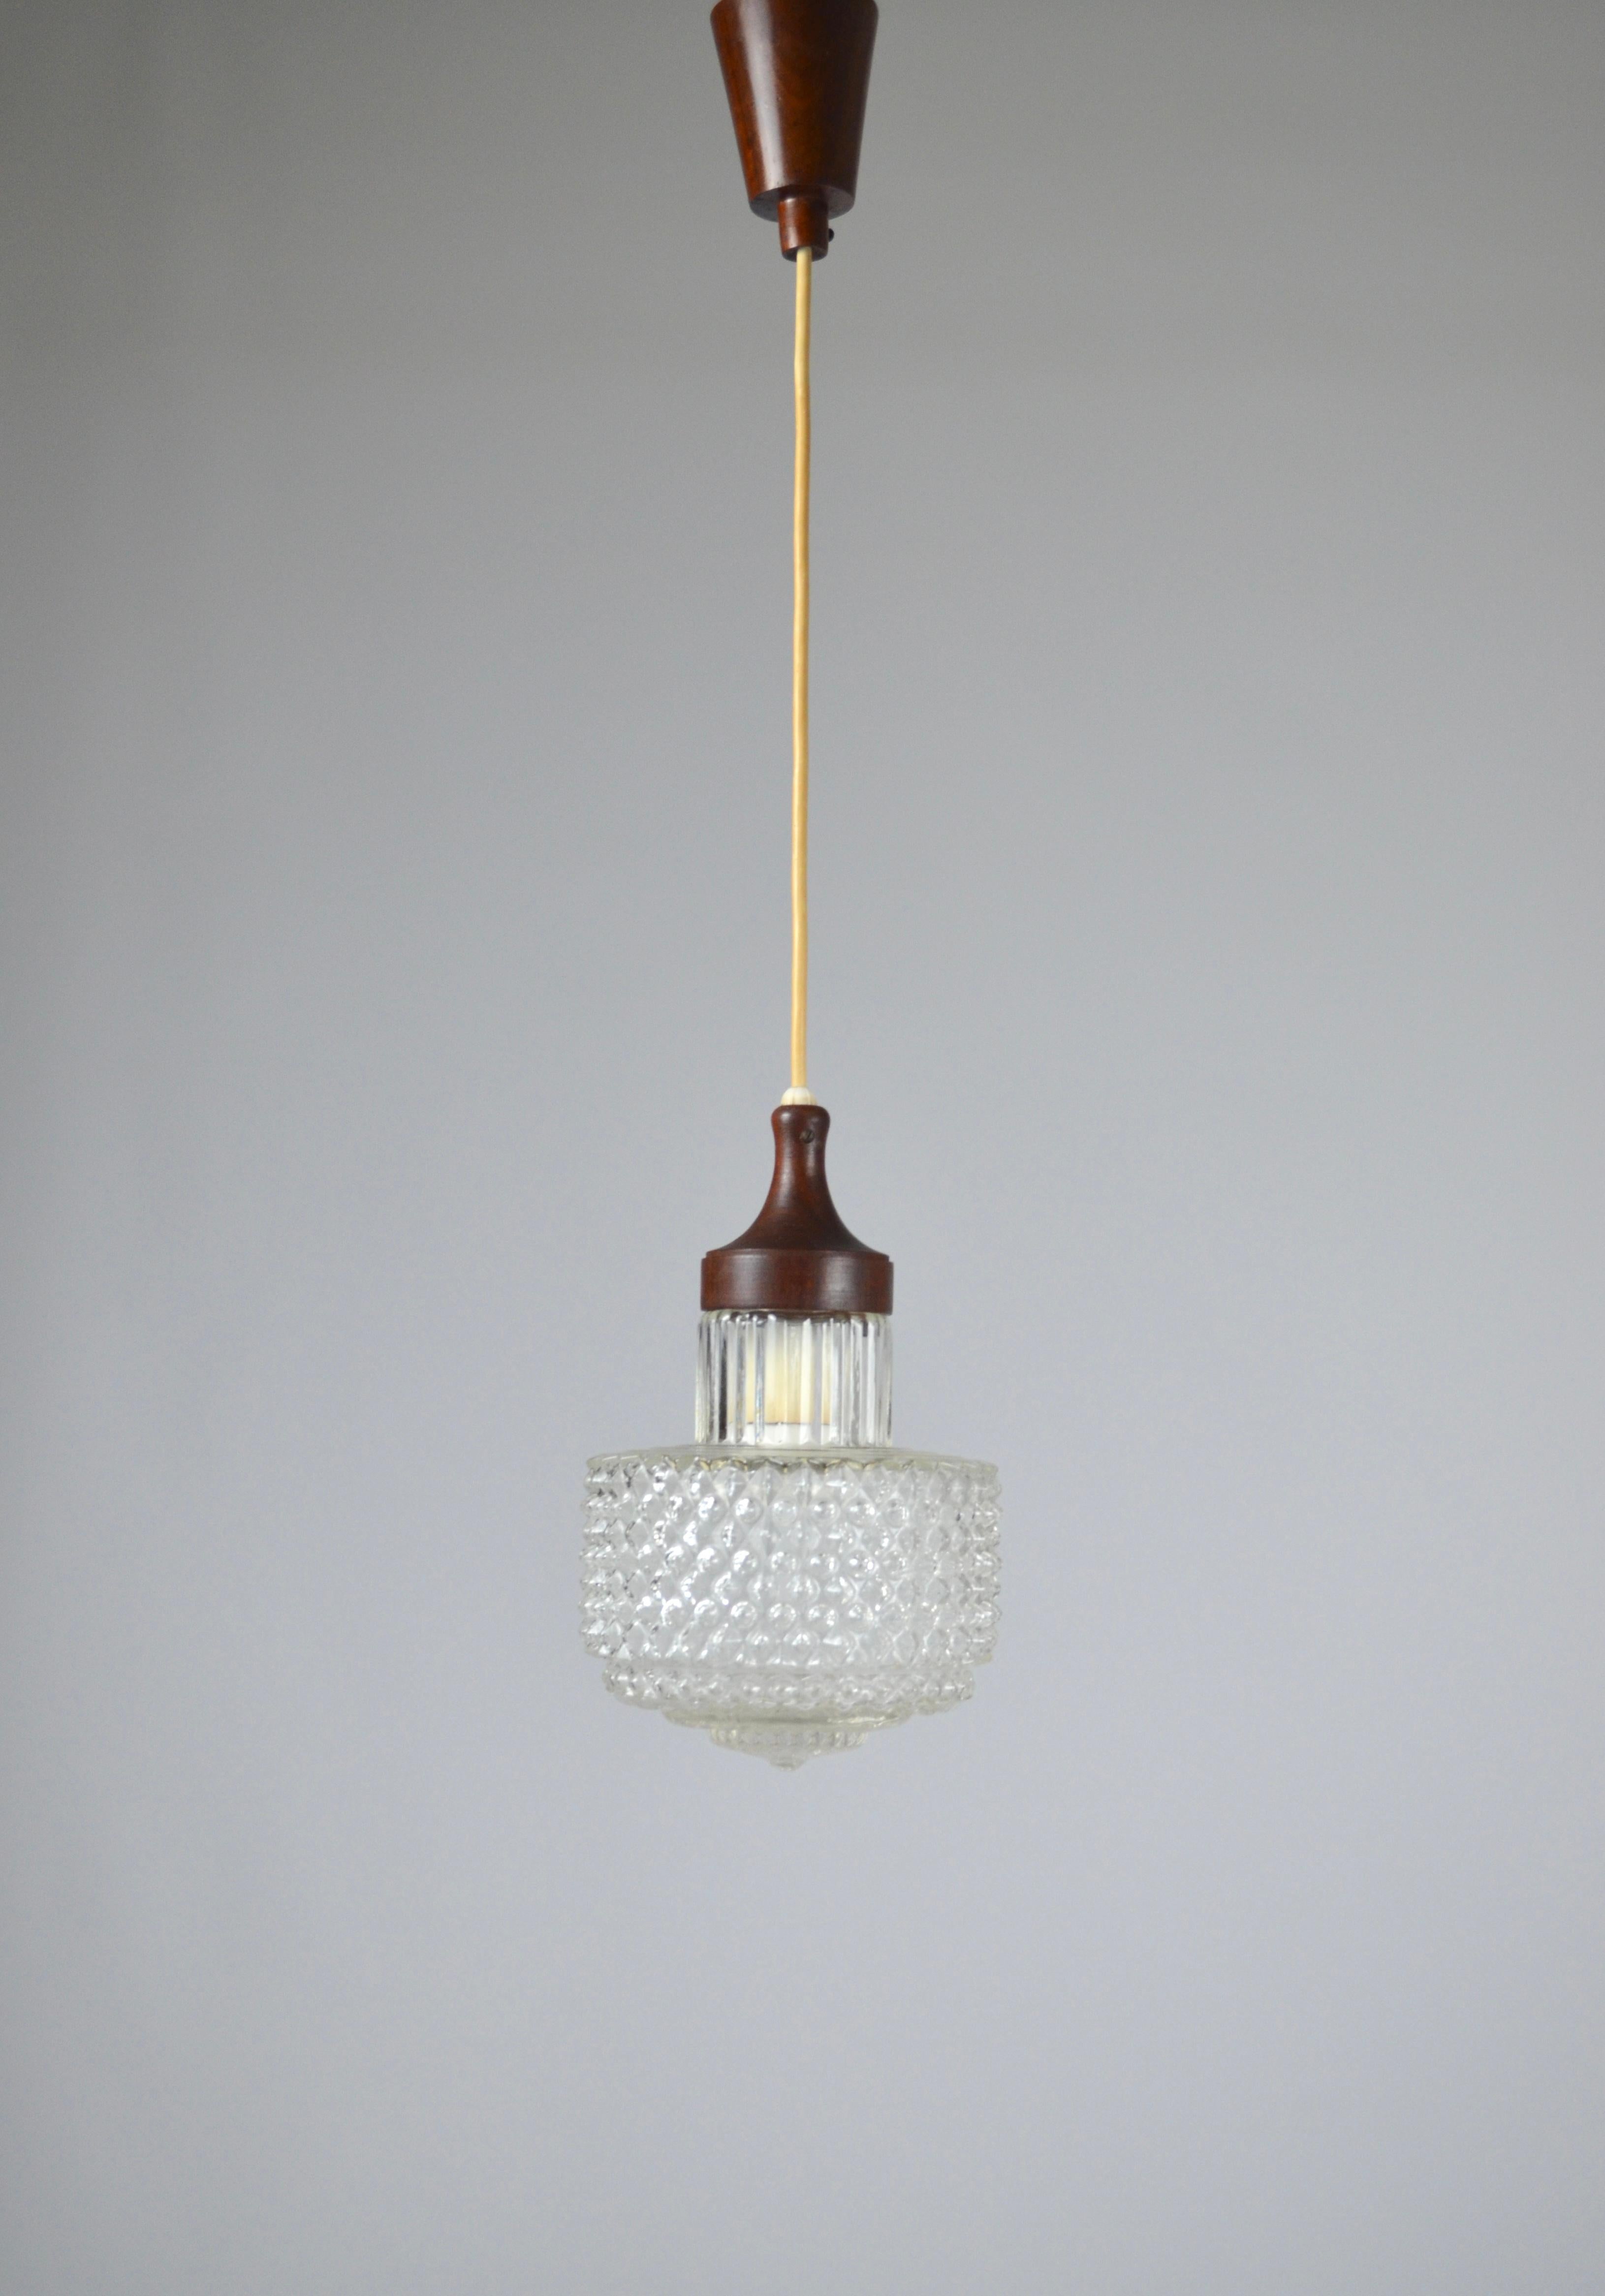 Elegant scandinavian pendant lamp, 1950s
Very beautiful glass globe and nice finish with its wooden elements